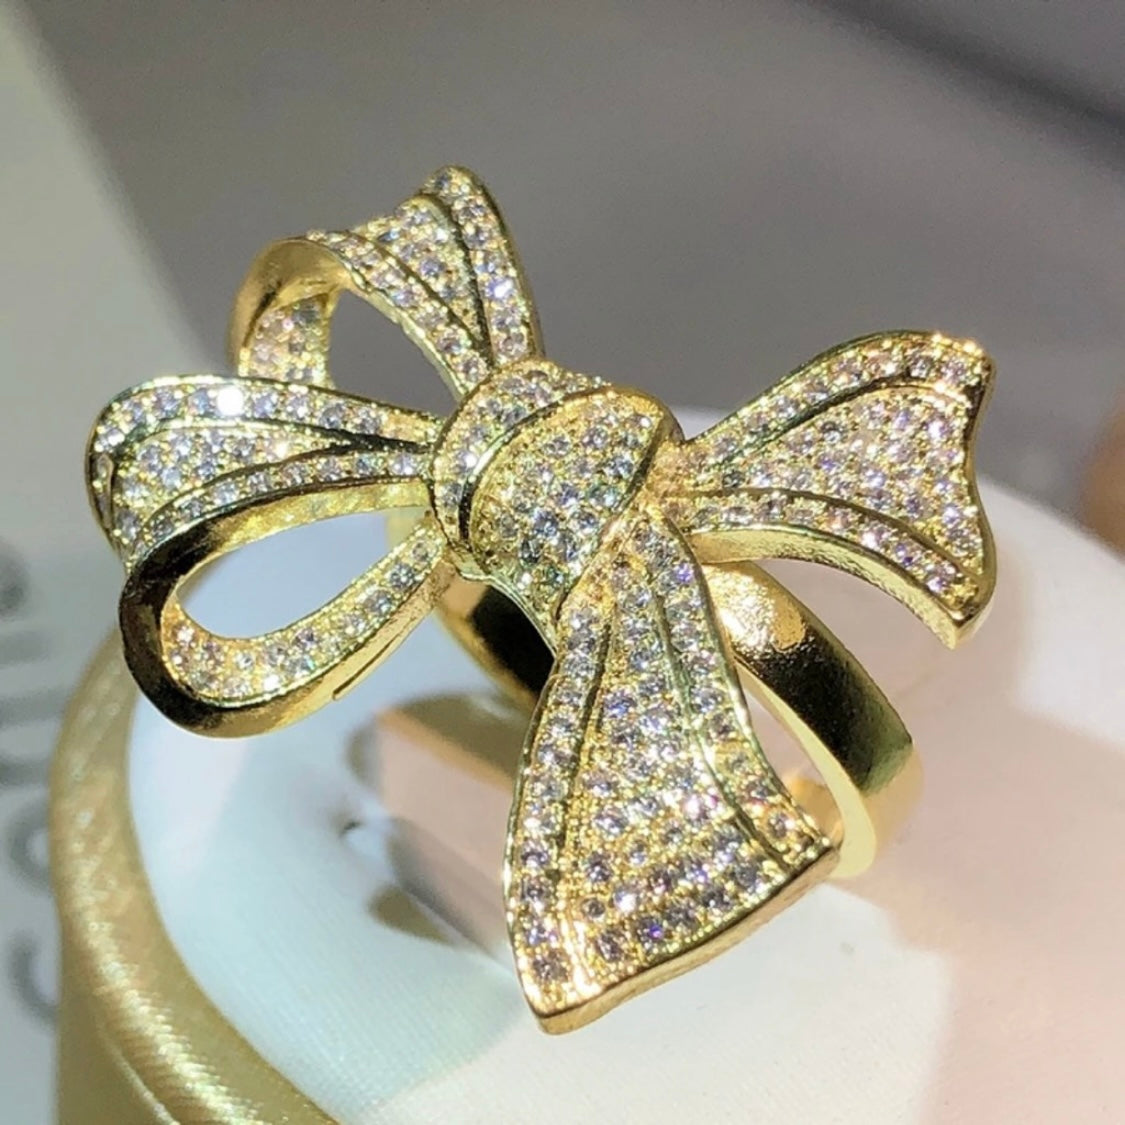 Rhinestone Bow Ring Womens Gold Plated Sterling Silver Statement Jewelry